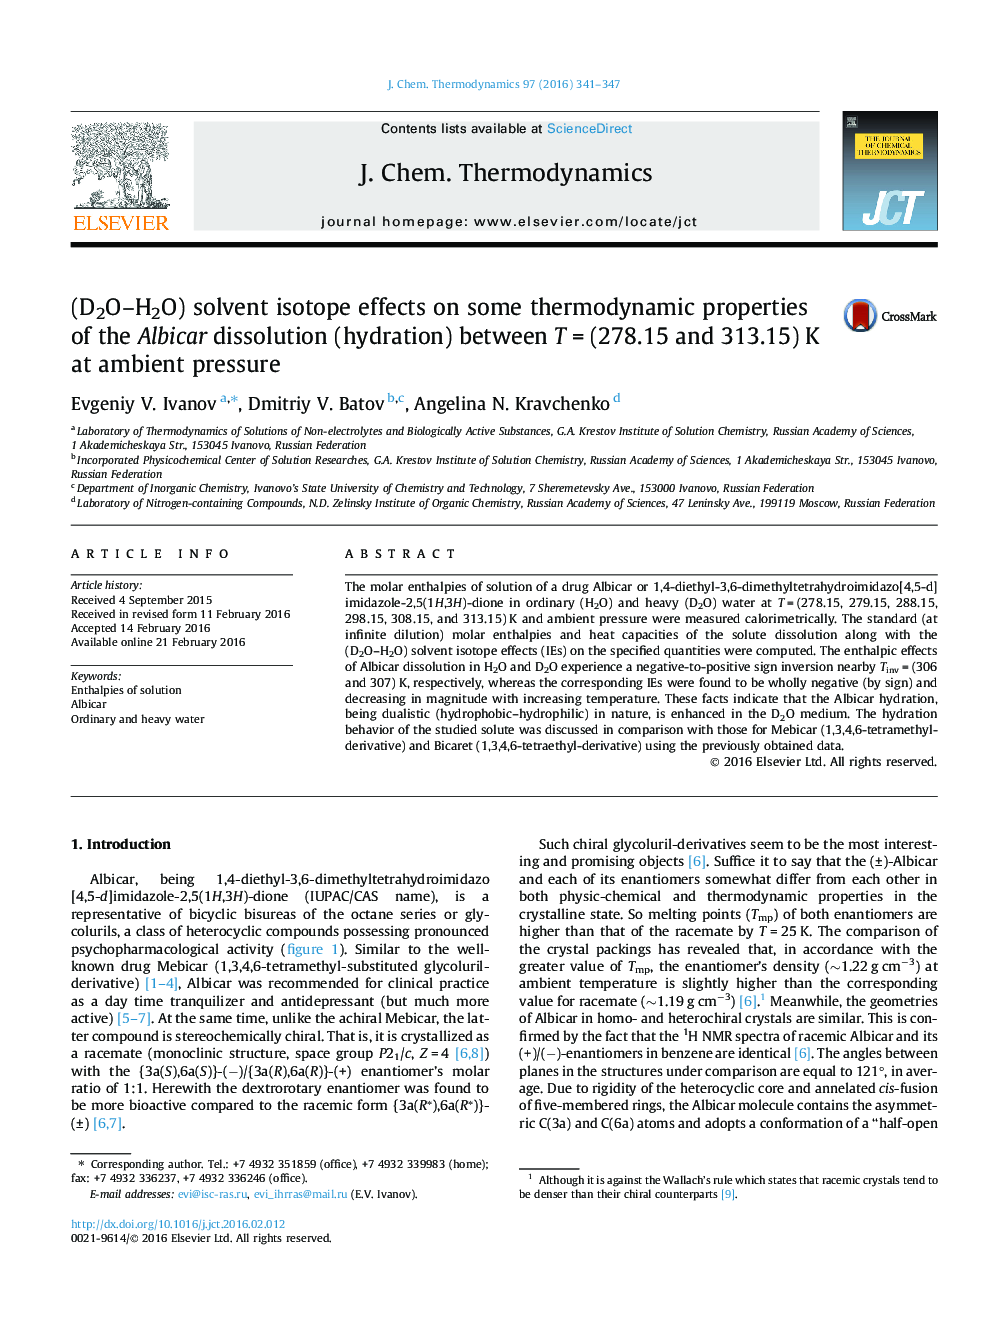 (D2O-H2O) solvent isotope effects on some thermodynamic properties of the Albicar dissolution (hydration) between TÂ =Â (278.15 and 313.15)Â K at ambient pressure